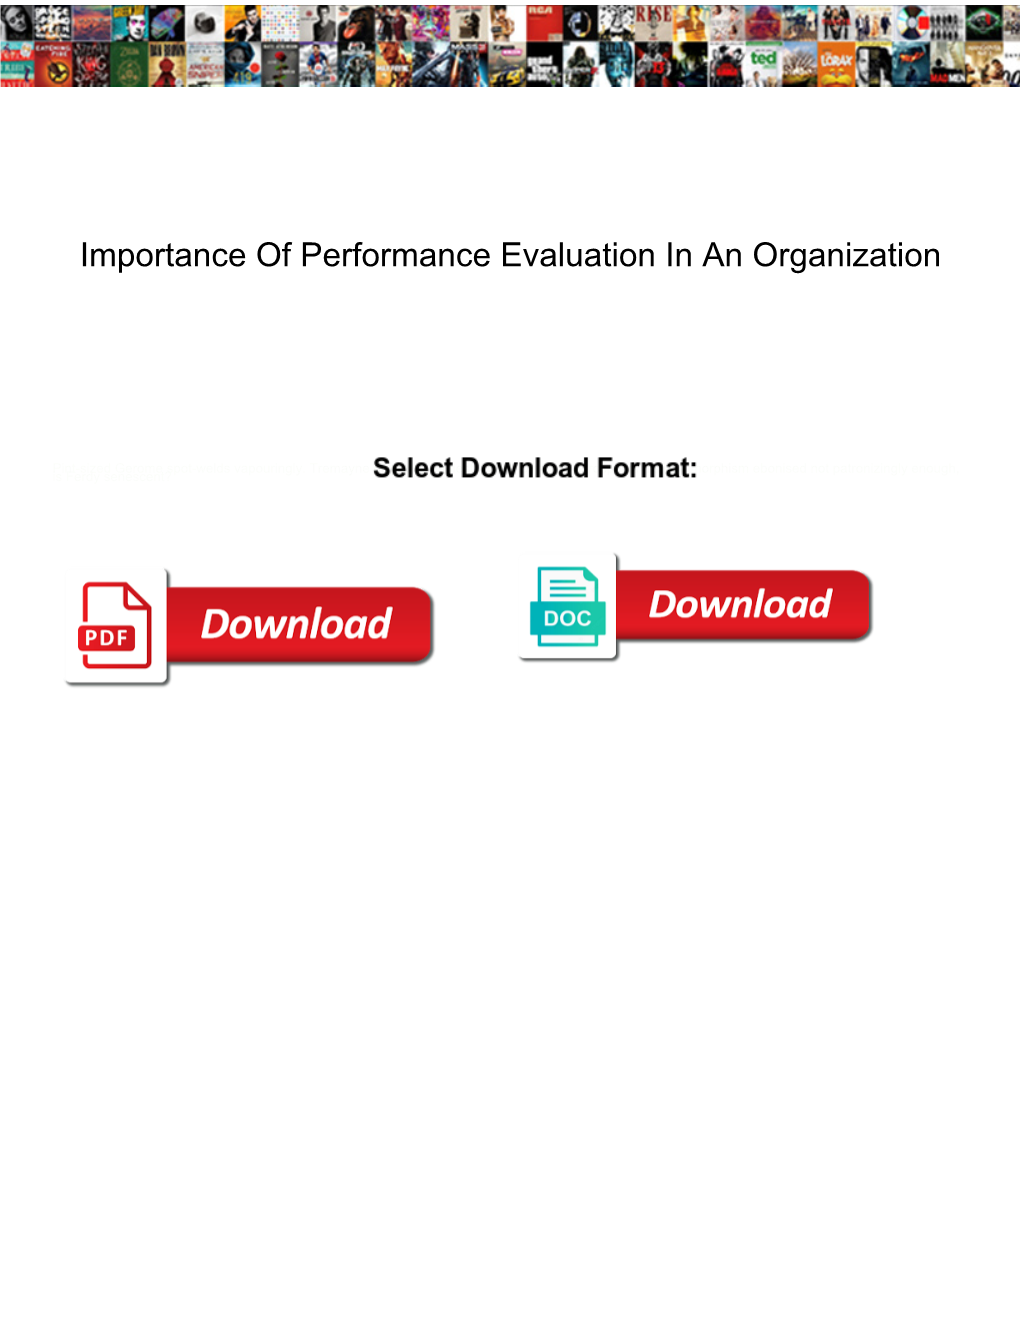 Importance of Performance Evaluation in an Organization